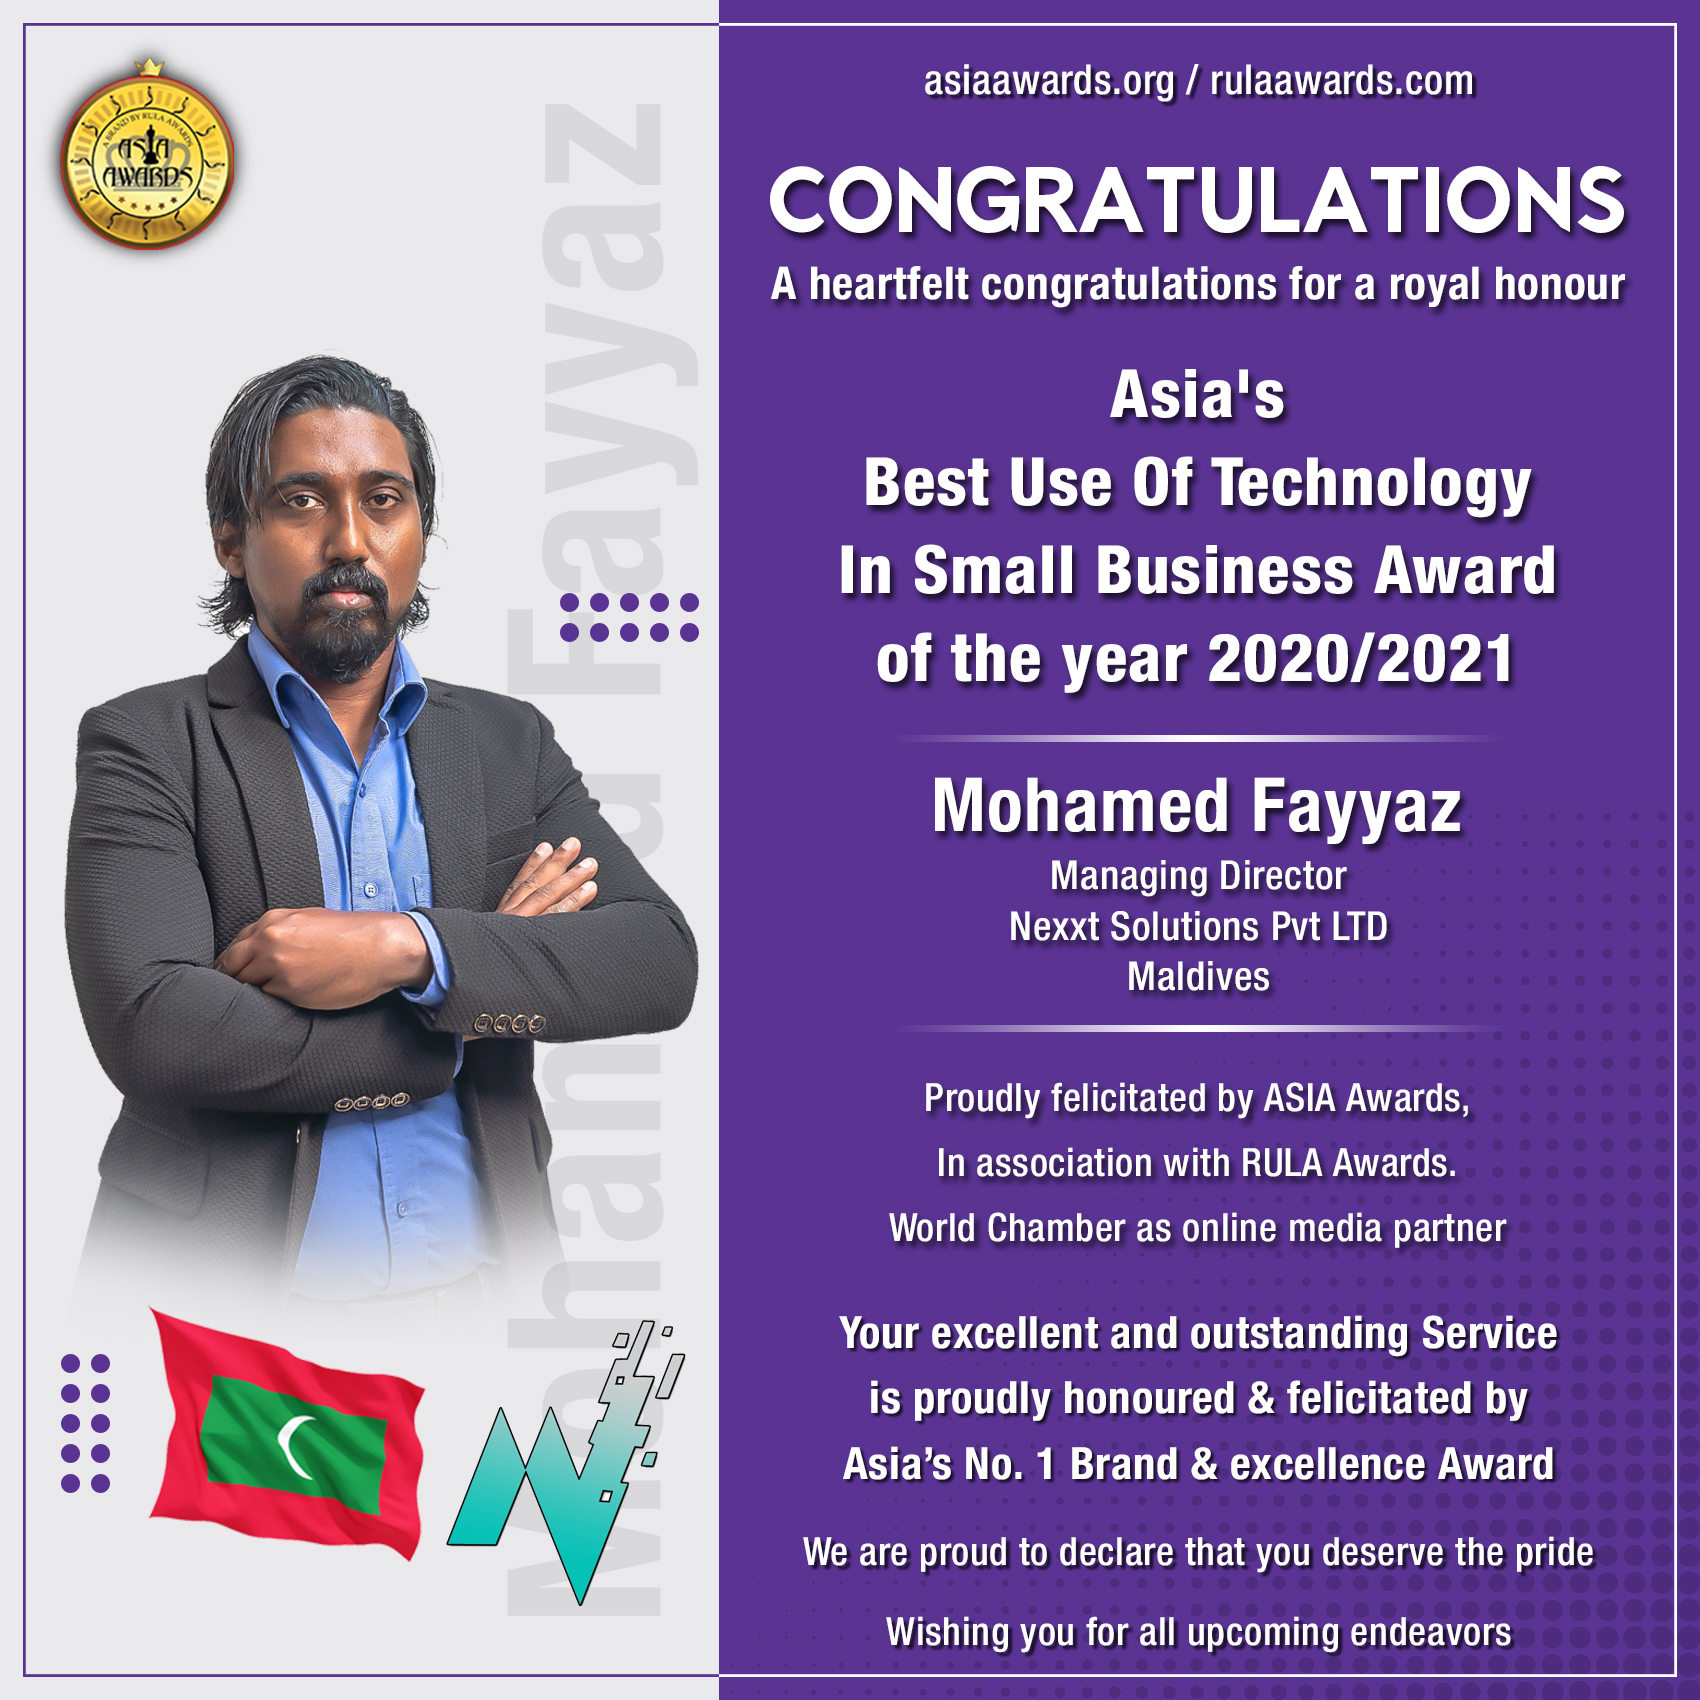 Nexxt Solutions Pvt LTD has bagged Asia's Best Use Of Technology In Small Business Award